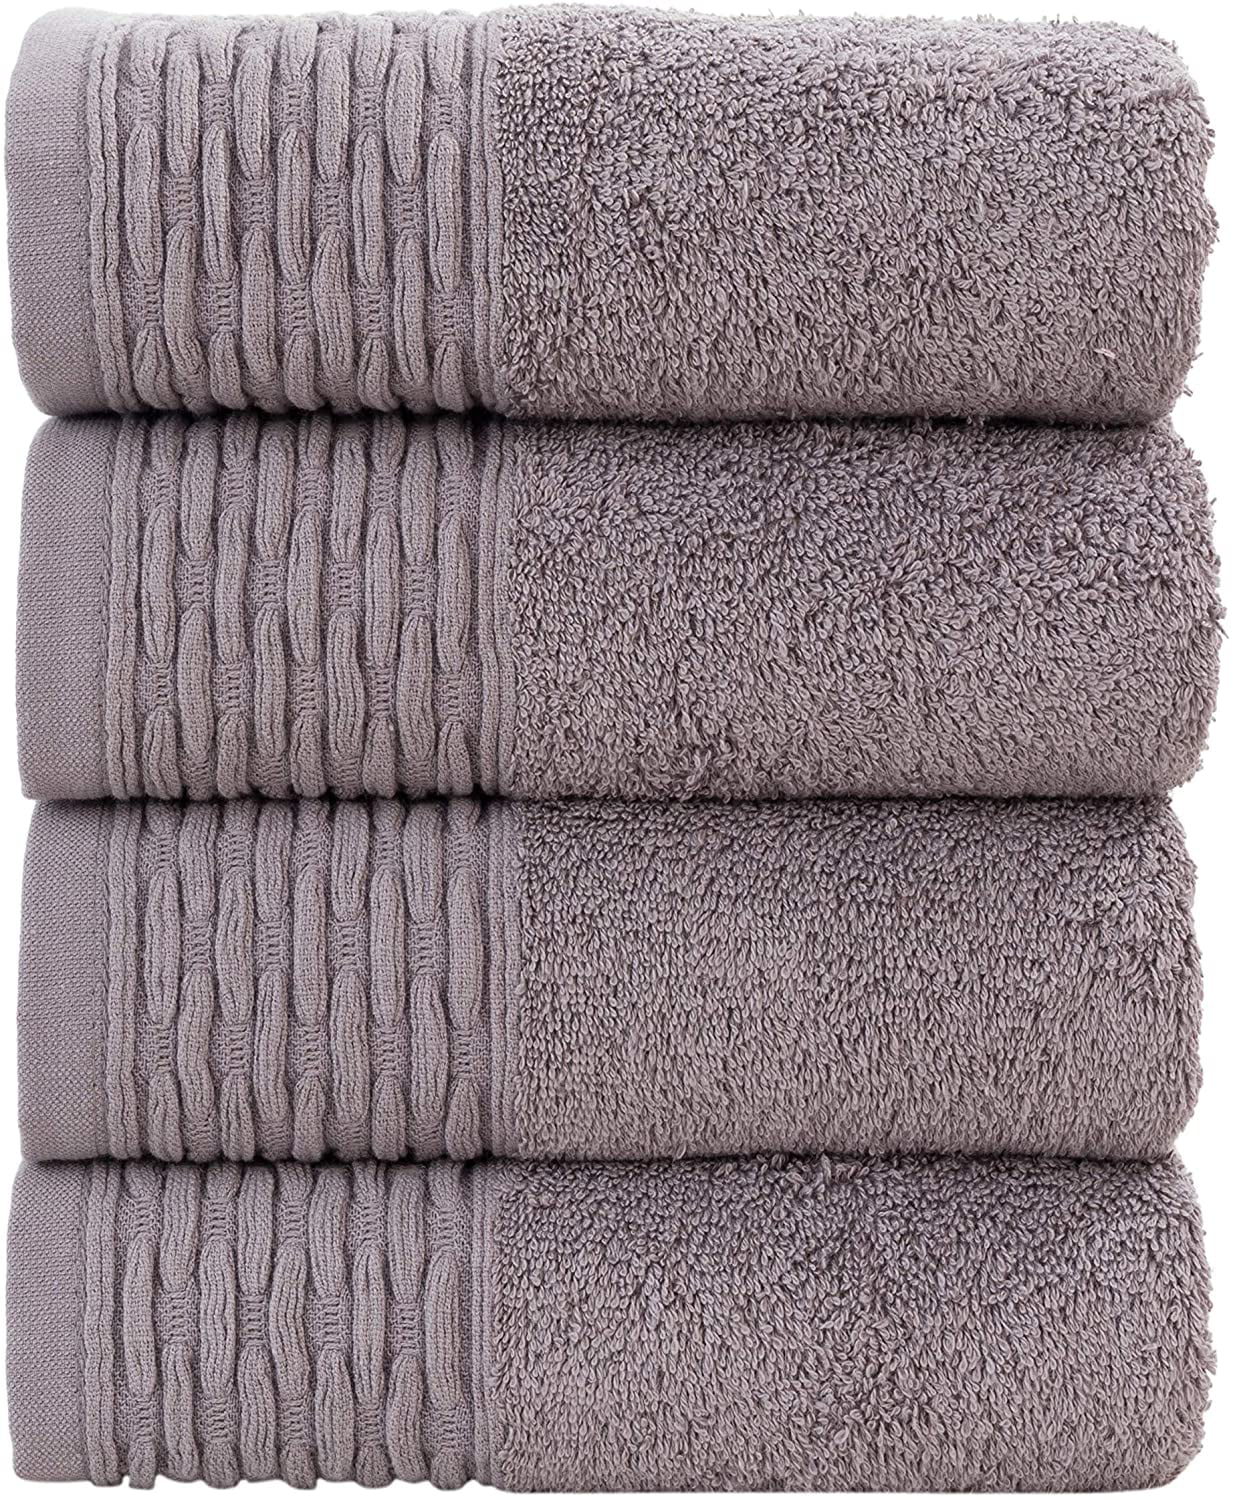 Details about   White Guest Towels 16 Count 